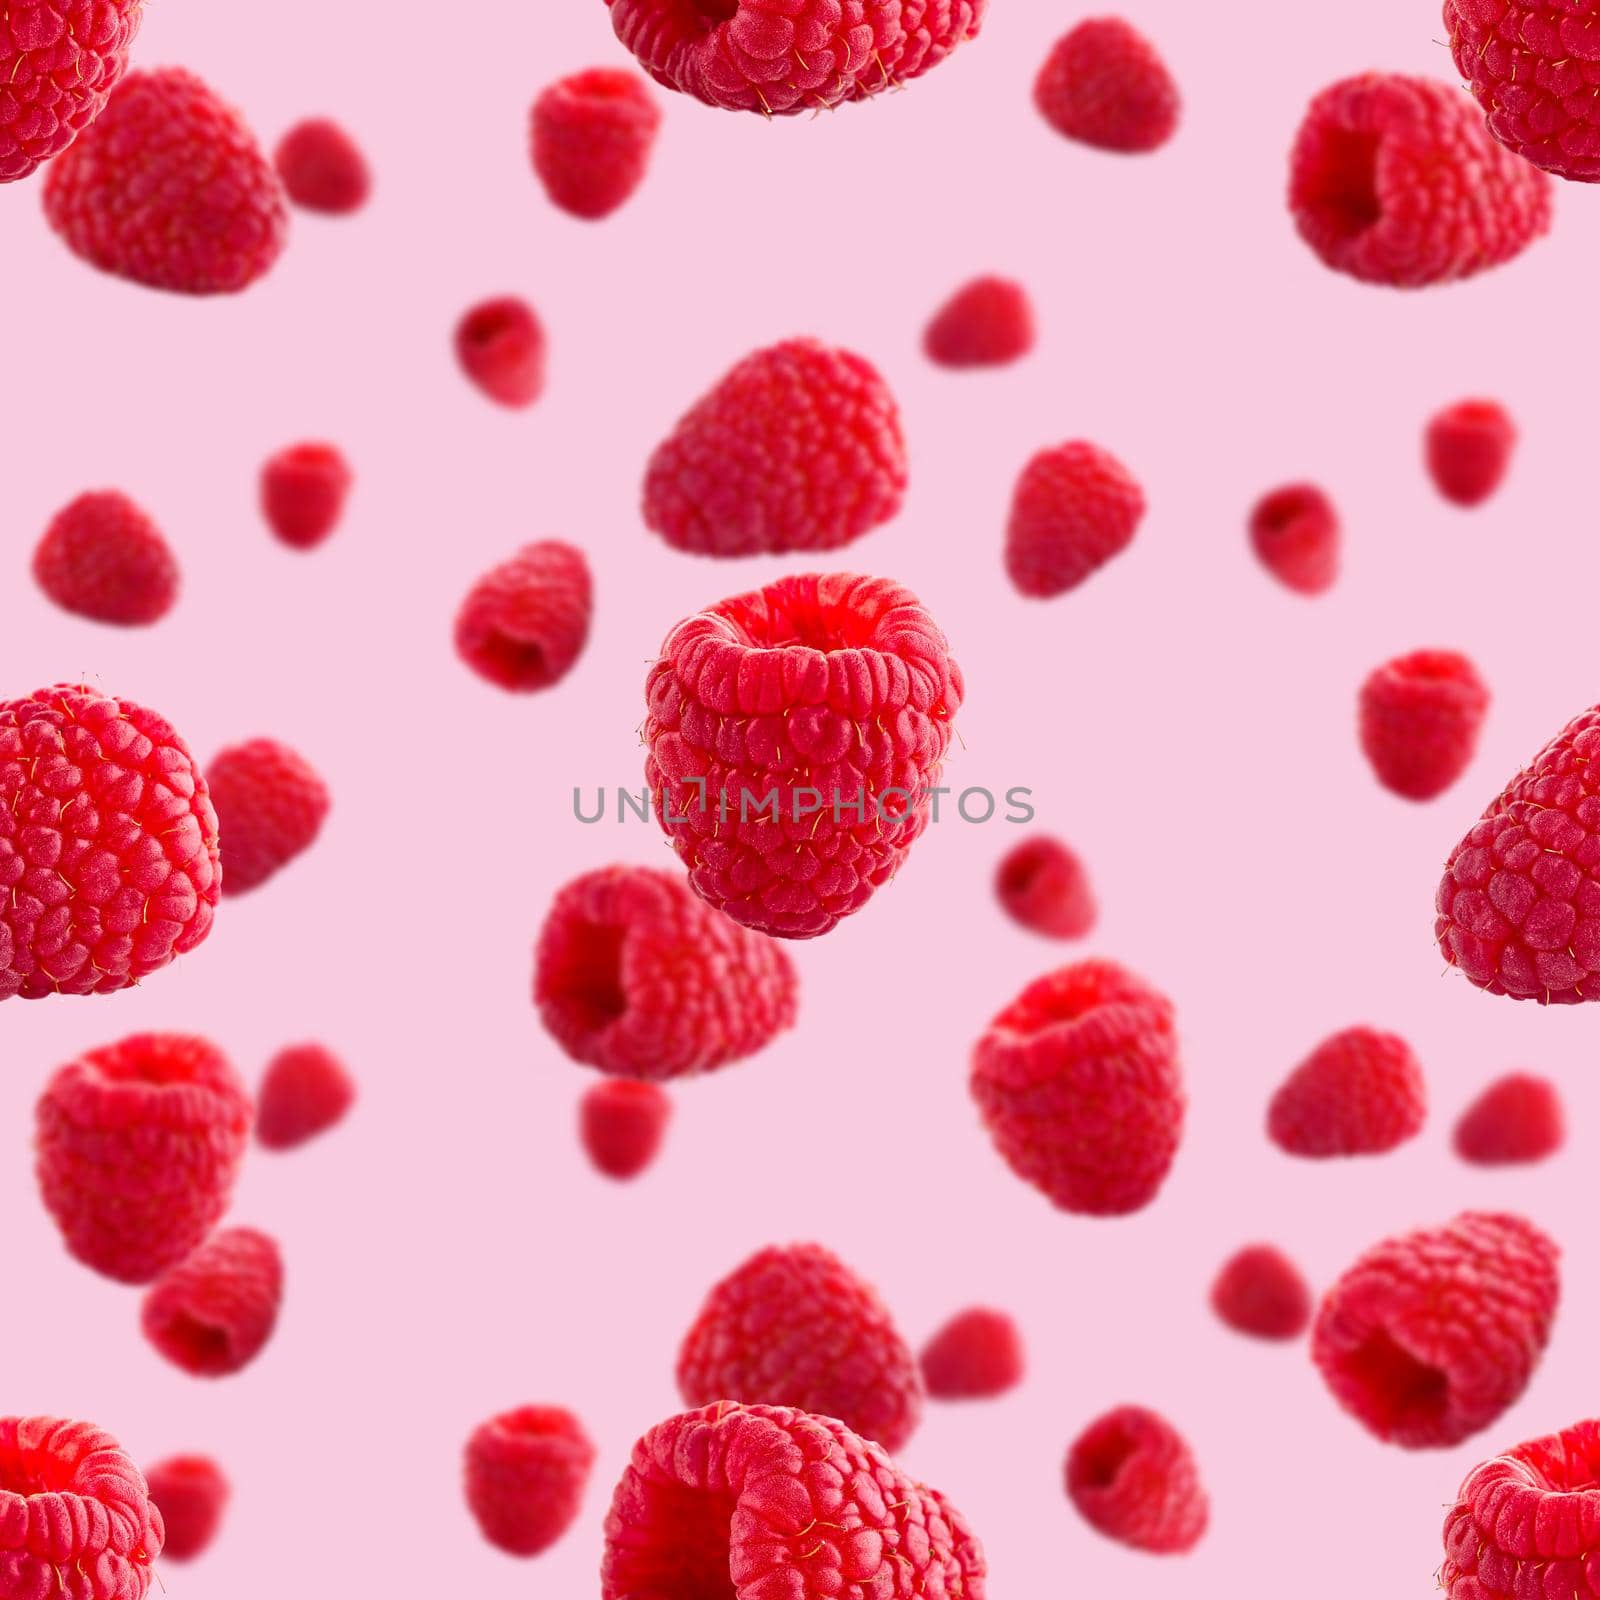 Seamless pattern with ripe raspberry. Berries abstract background. Raspberry pattern for package design with pink background.